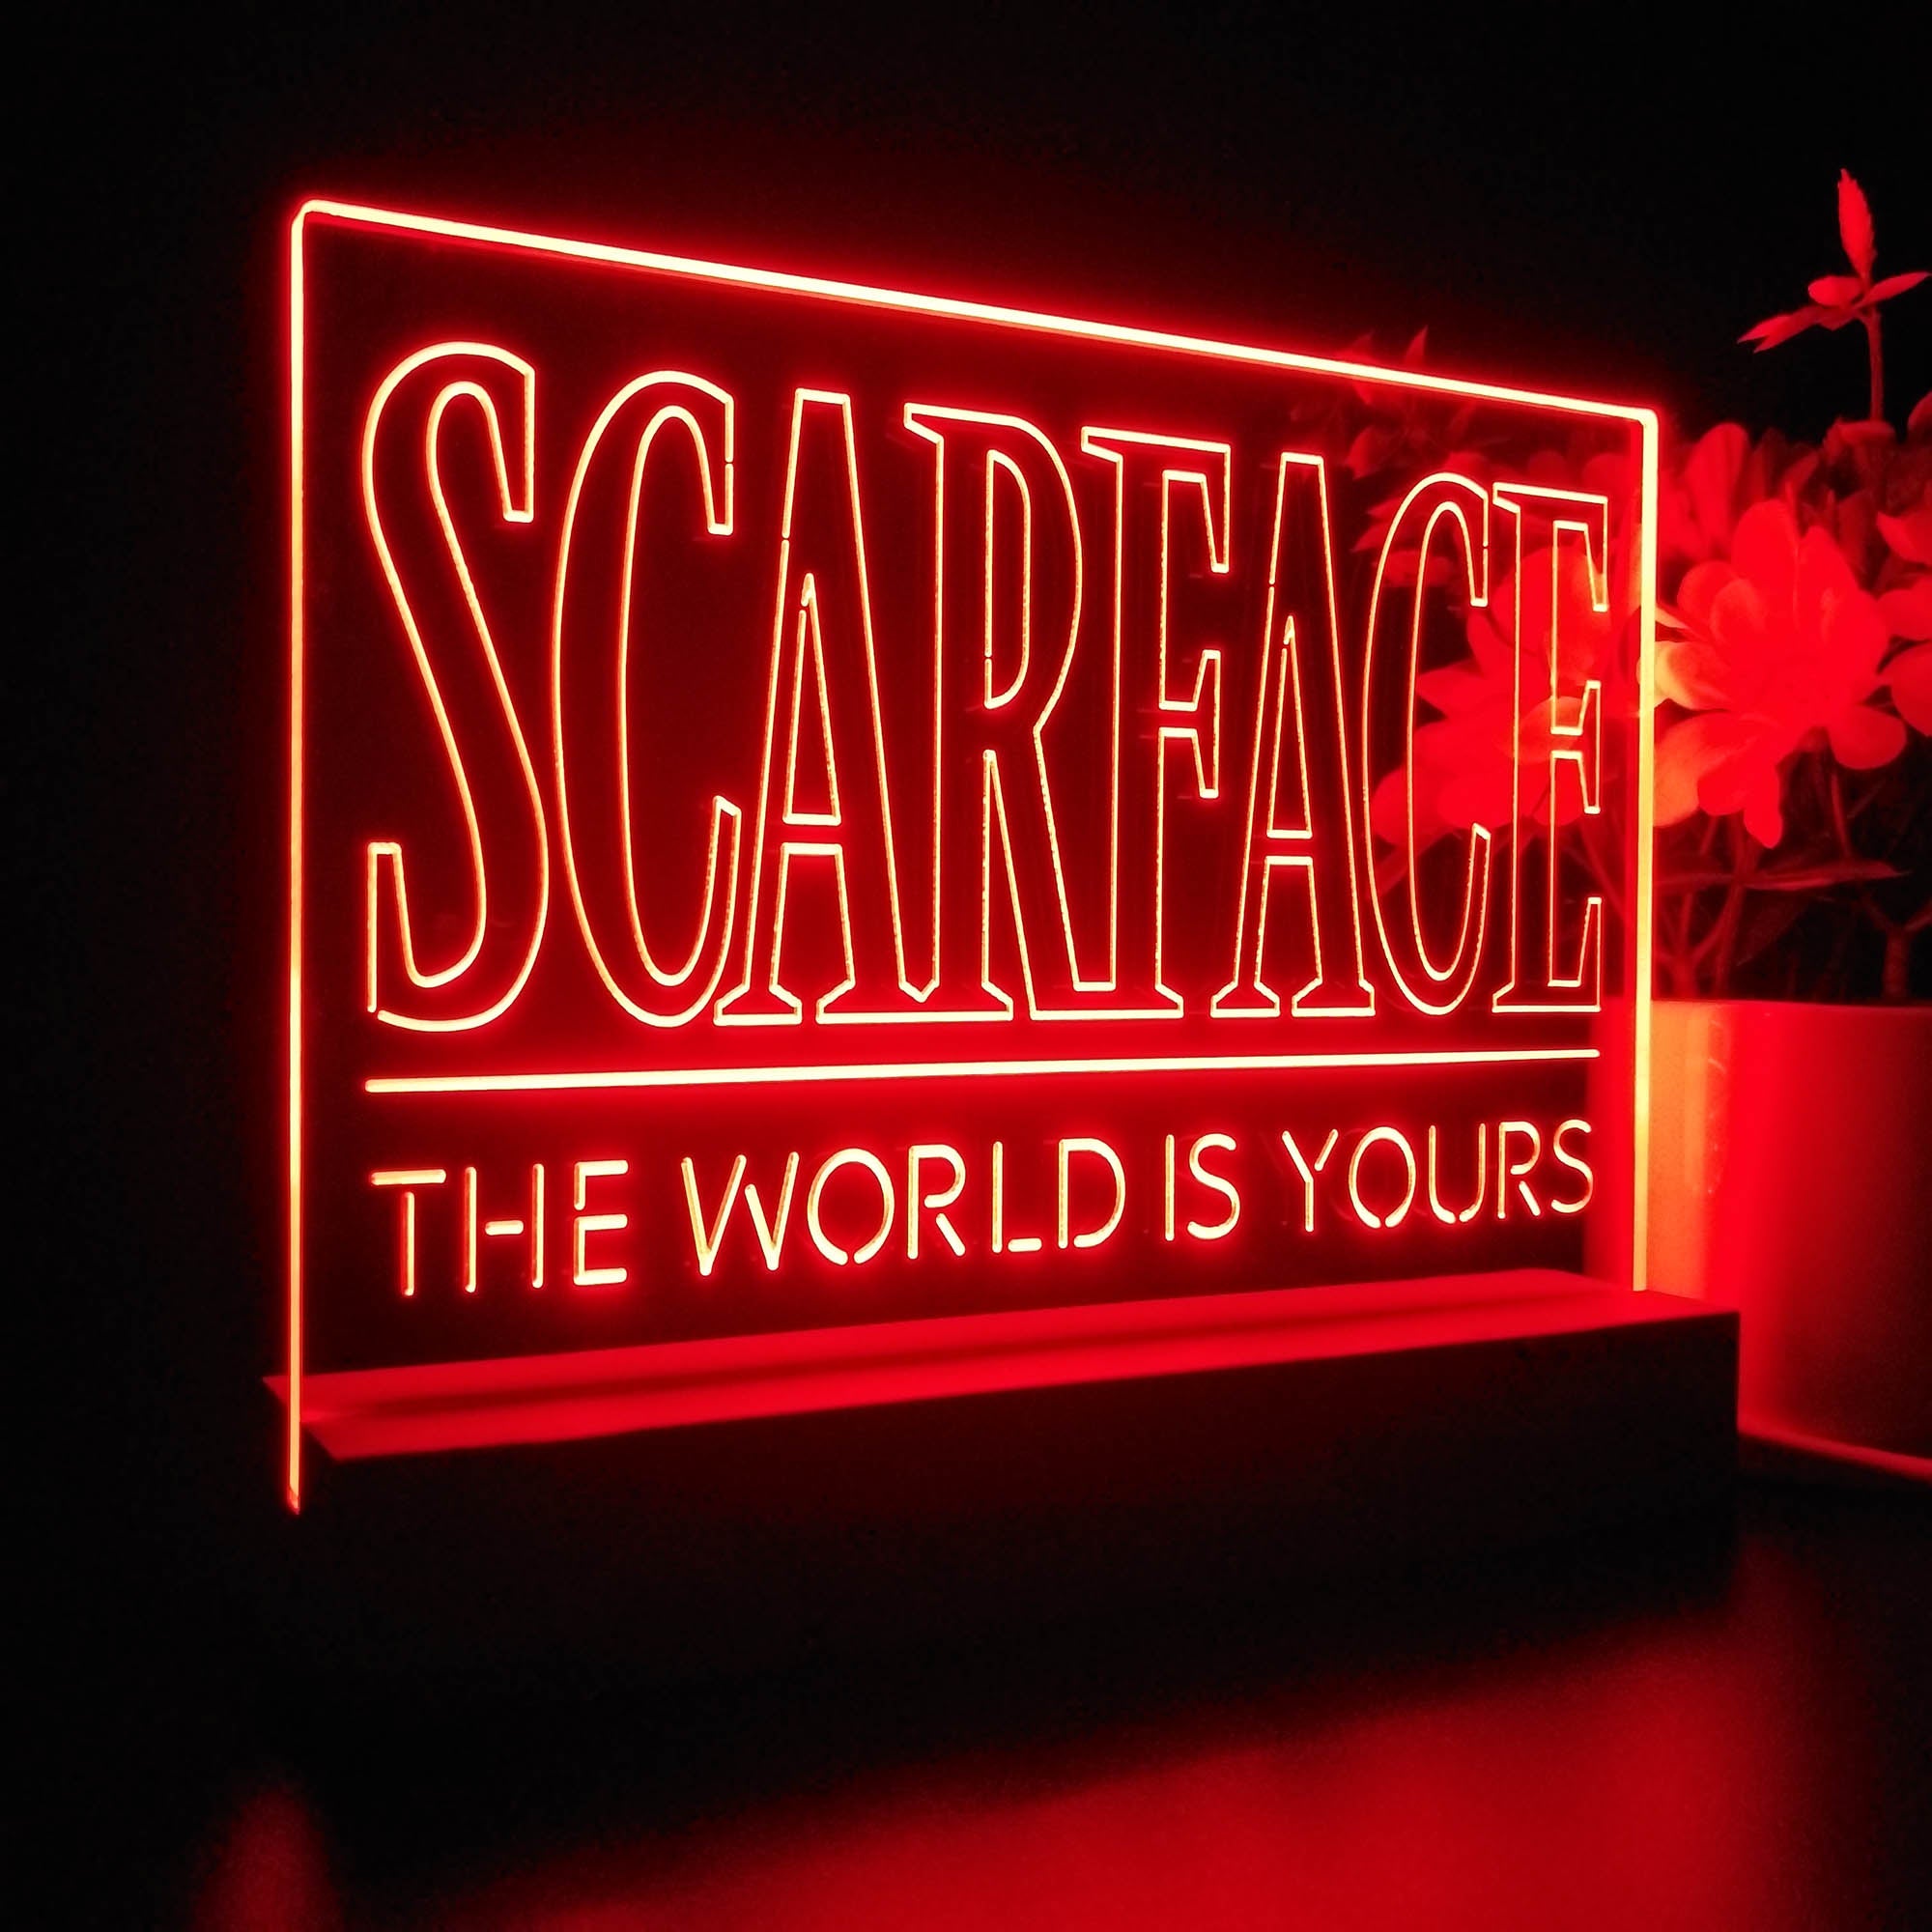 Scarface The World is Yours Night Light LED Sign